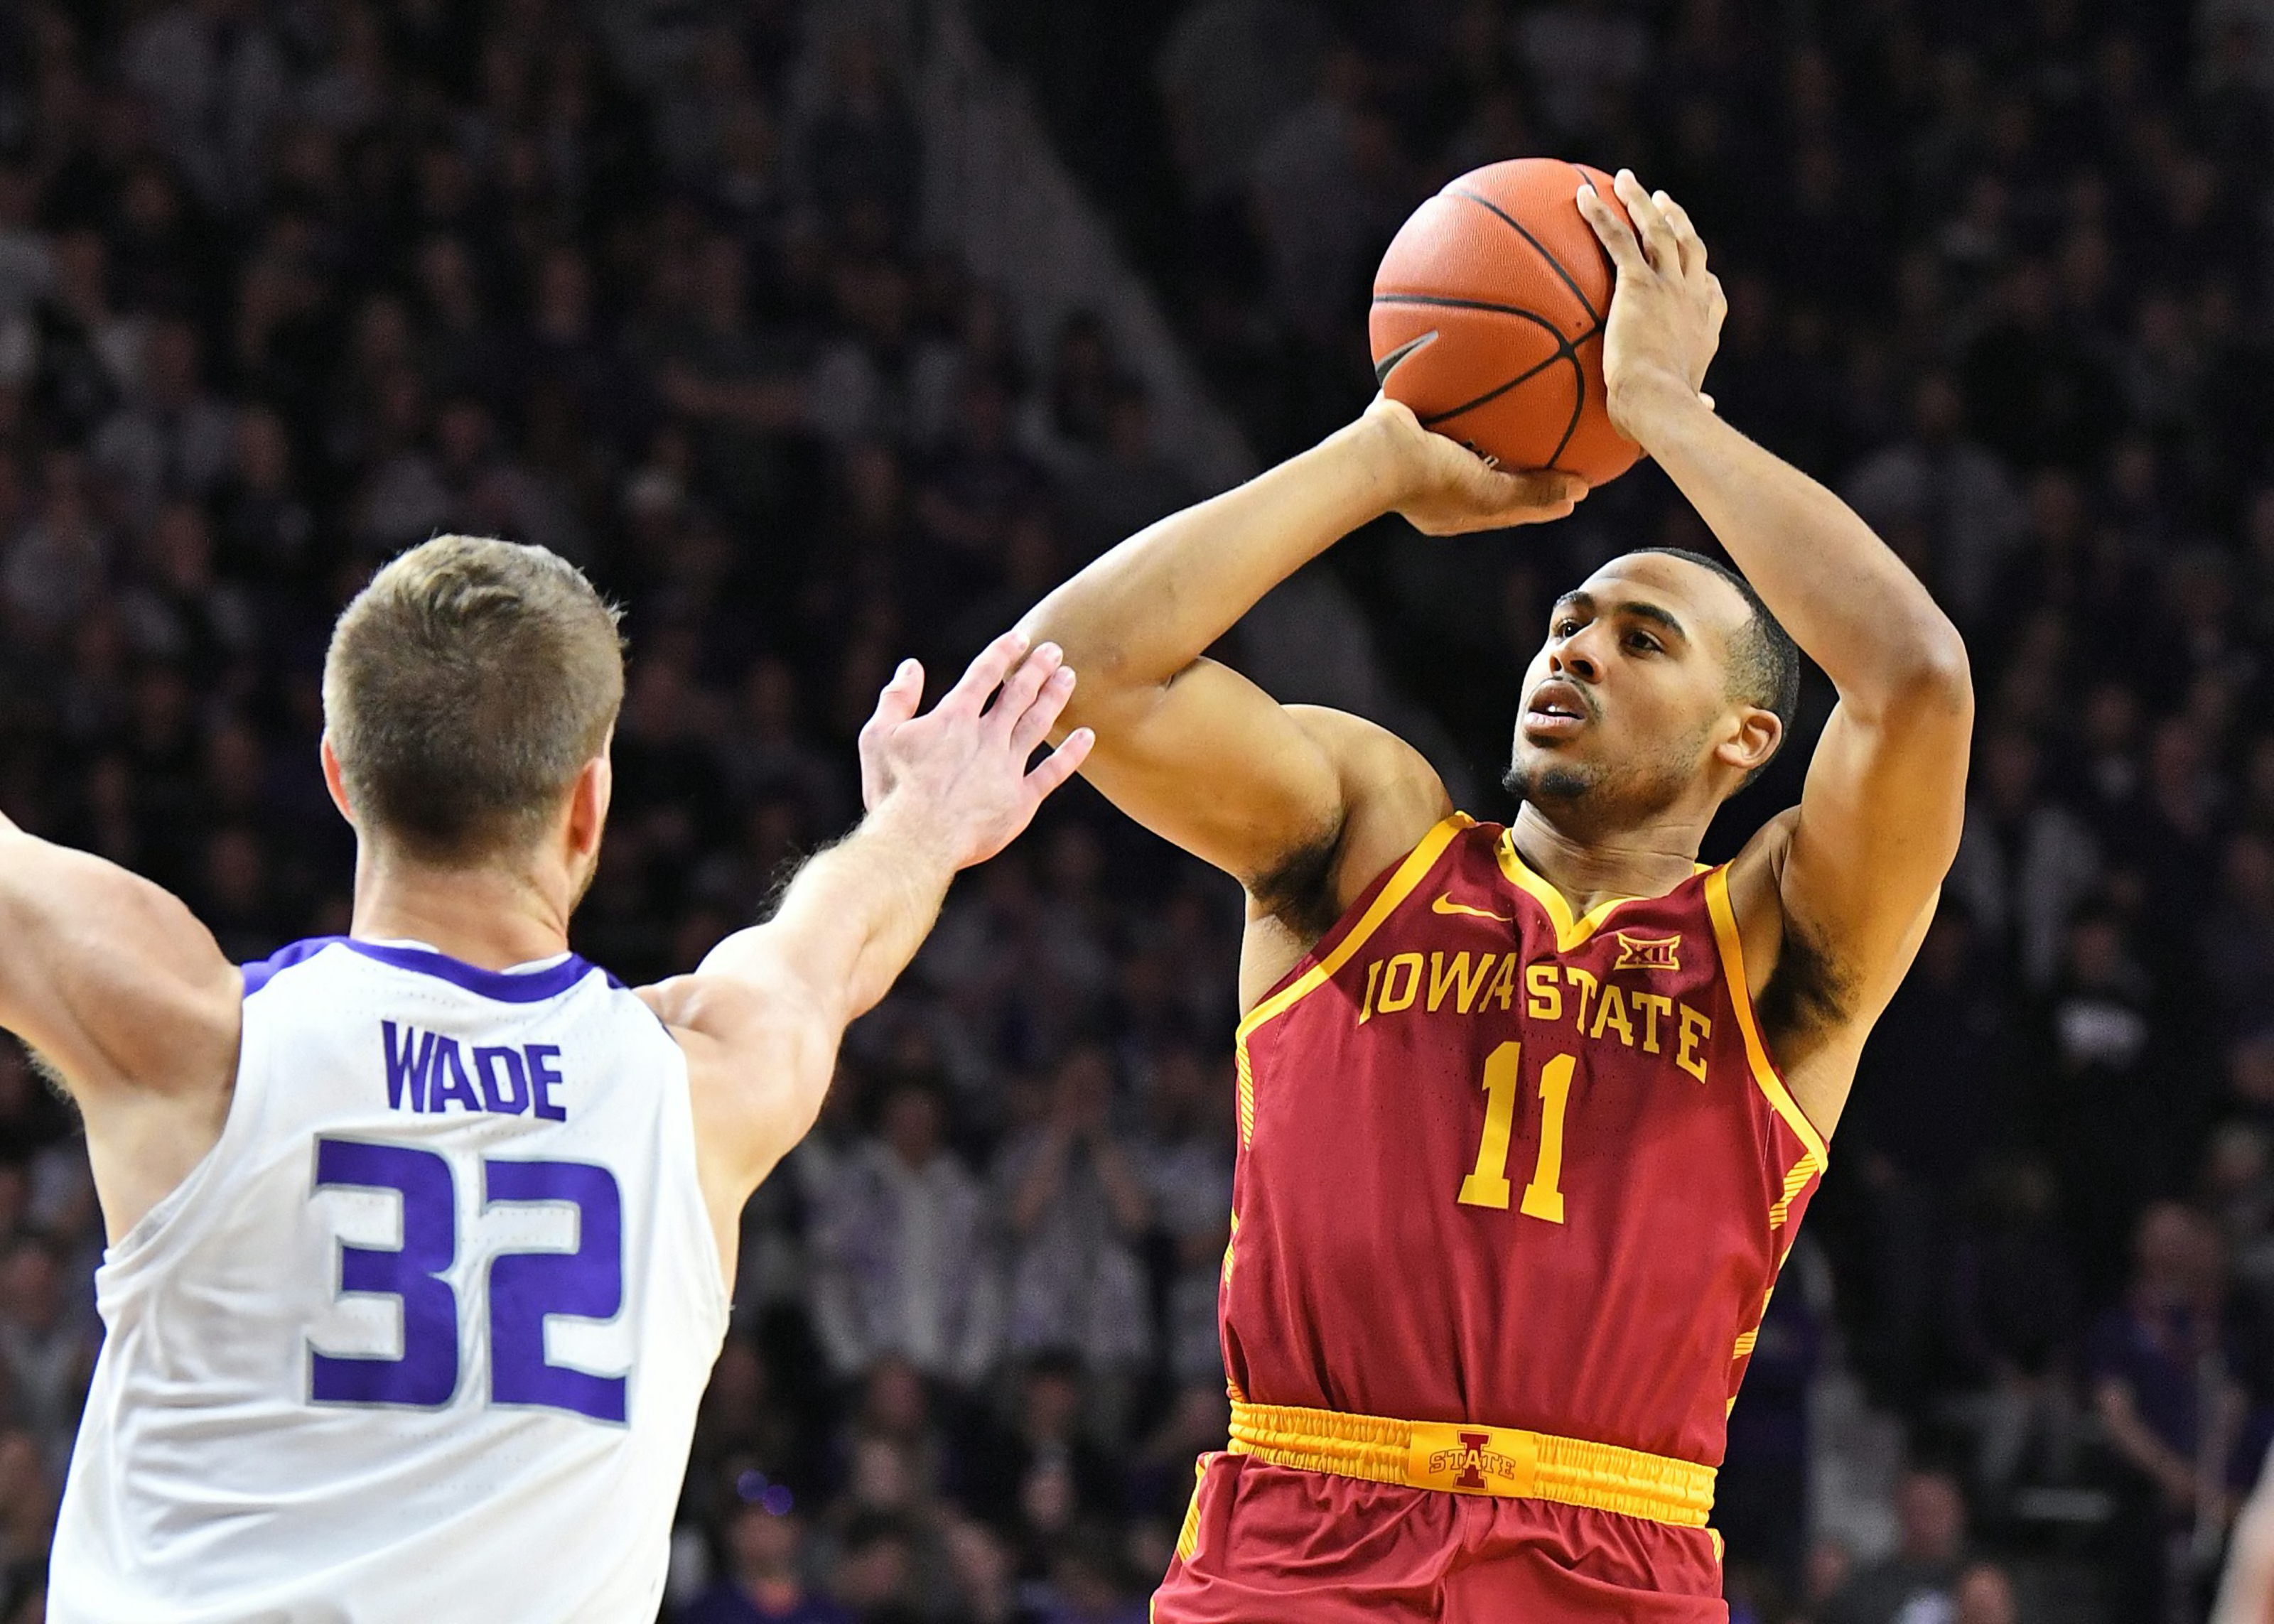 NBA draft: Talen Horton-Tucker must be content to learn the pro